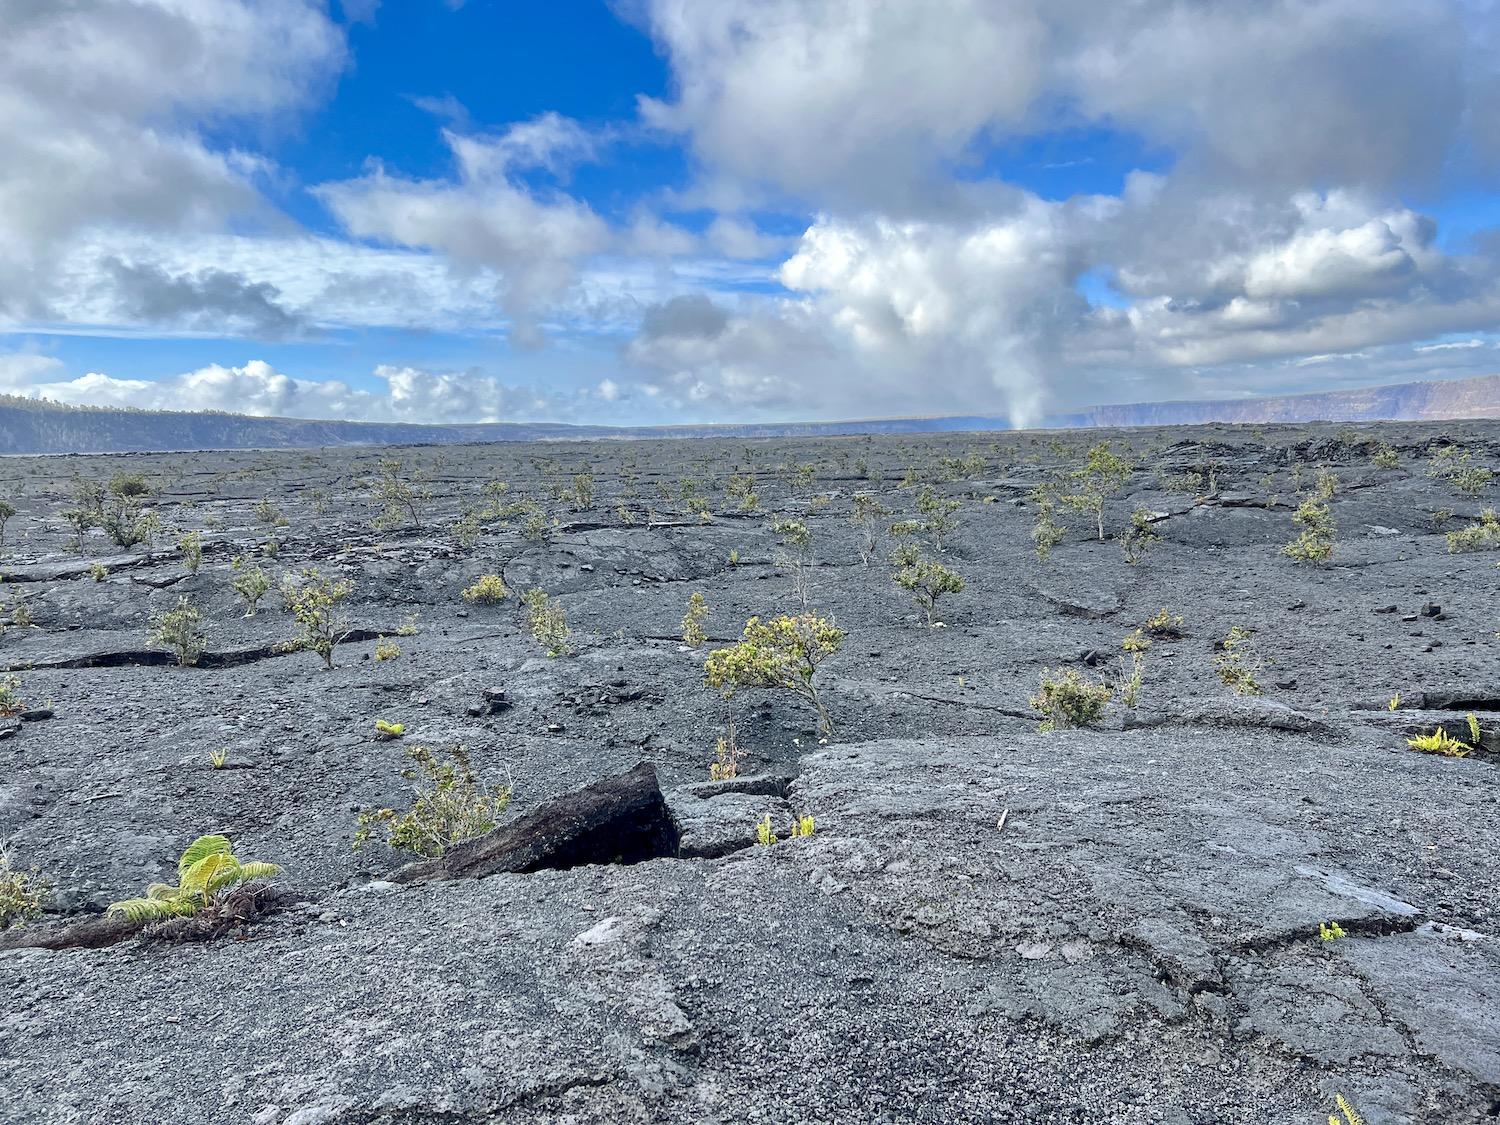 A path from Volcano House down Halema'uma'u Trail takes you out briefly along the caldera floor.